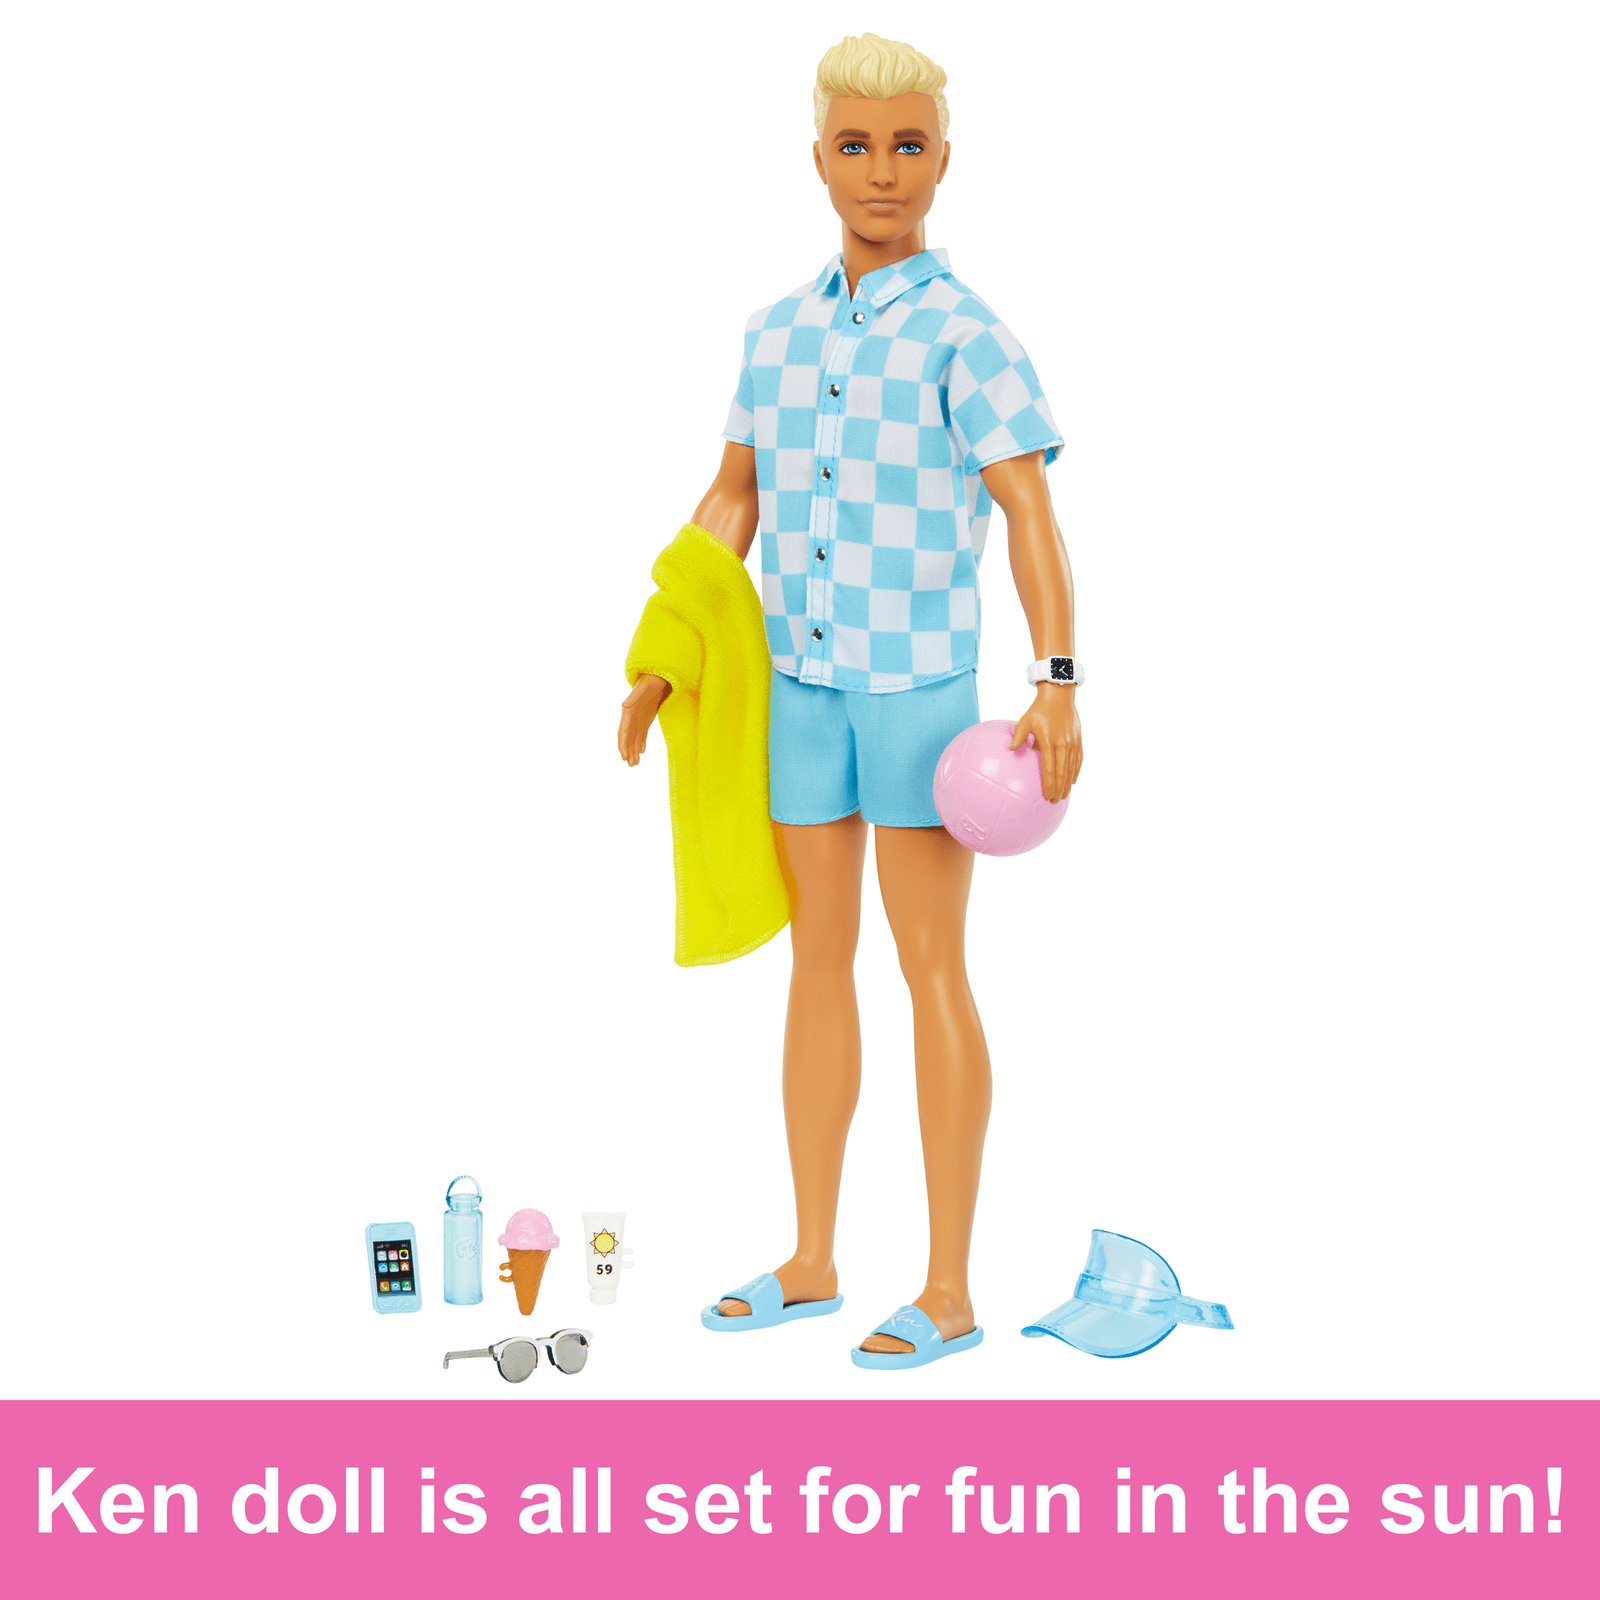 Barbie Blonde Ken Doll with Swim Trunks and Beach-Themed Accessories